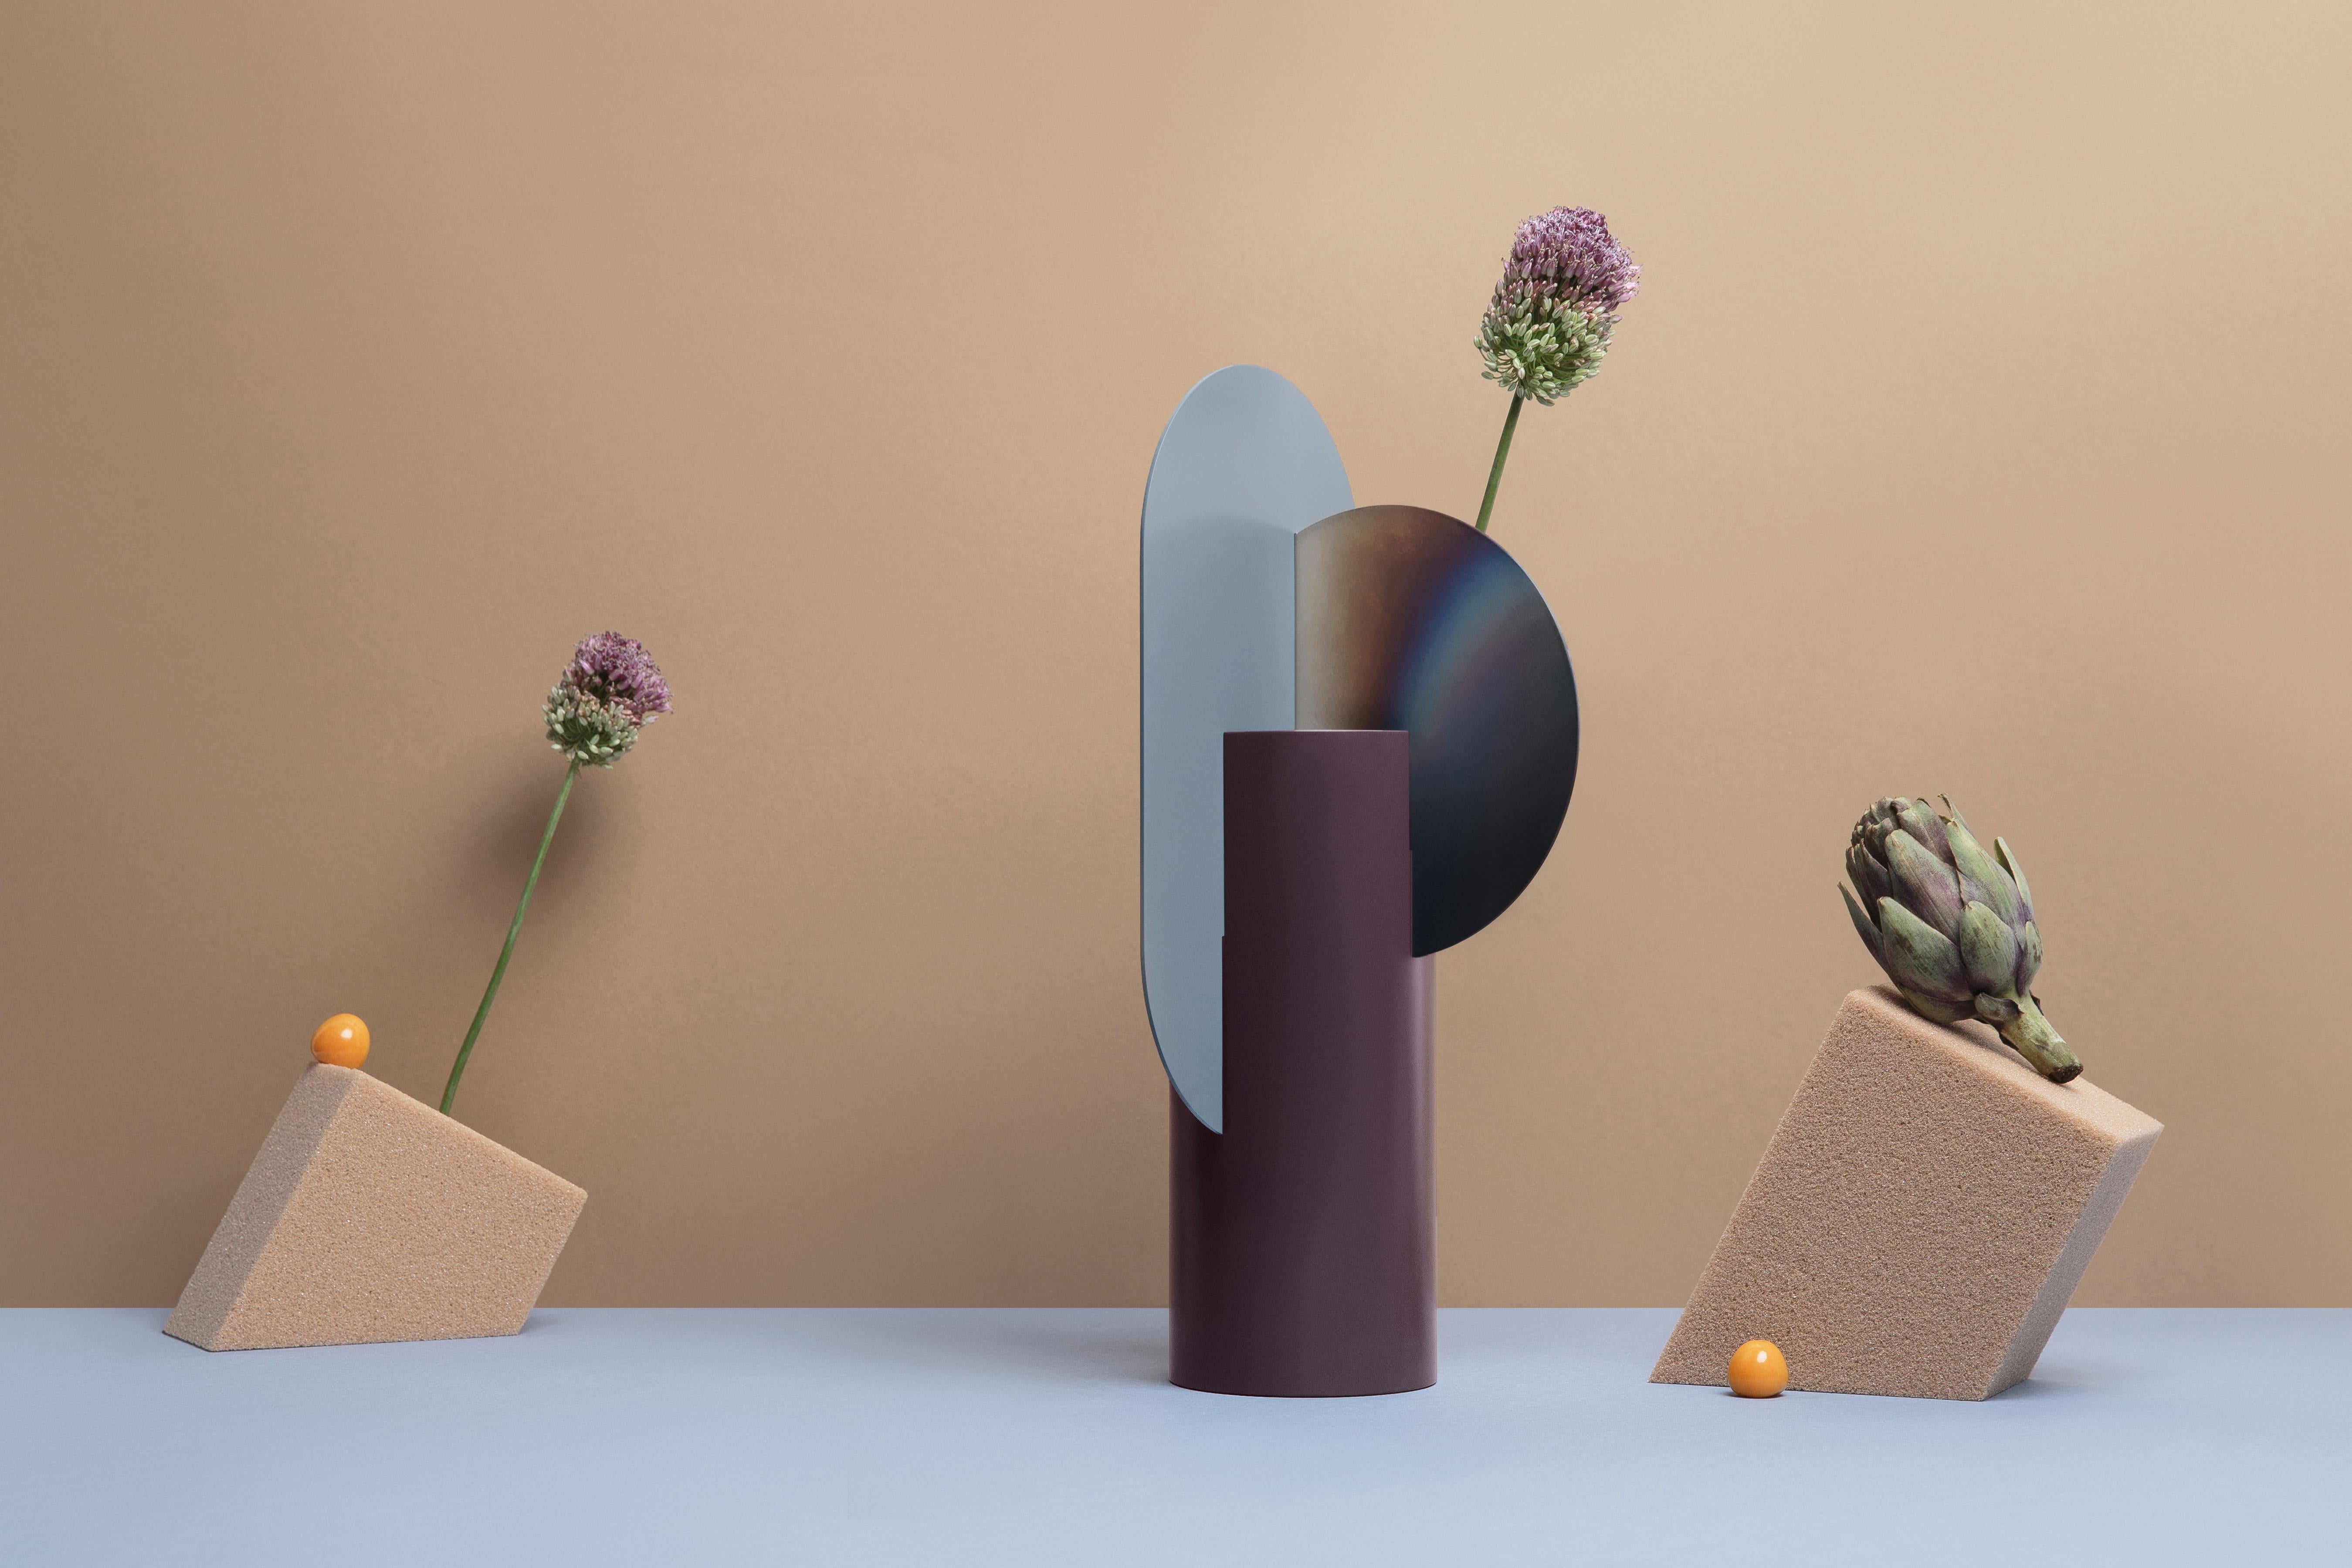 Malevich vase limited edition by NOOM
Limited edition
Dimensions: H 37 cm x W 17.5 cm x D 15 cm
Materials: Burned steel, painted steel

NOOM is a young rapidly growing design company from Ukraine that produces lighting, decor and home